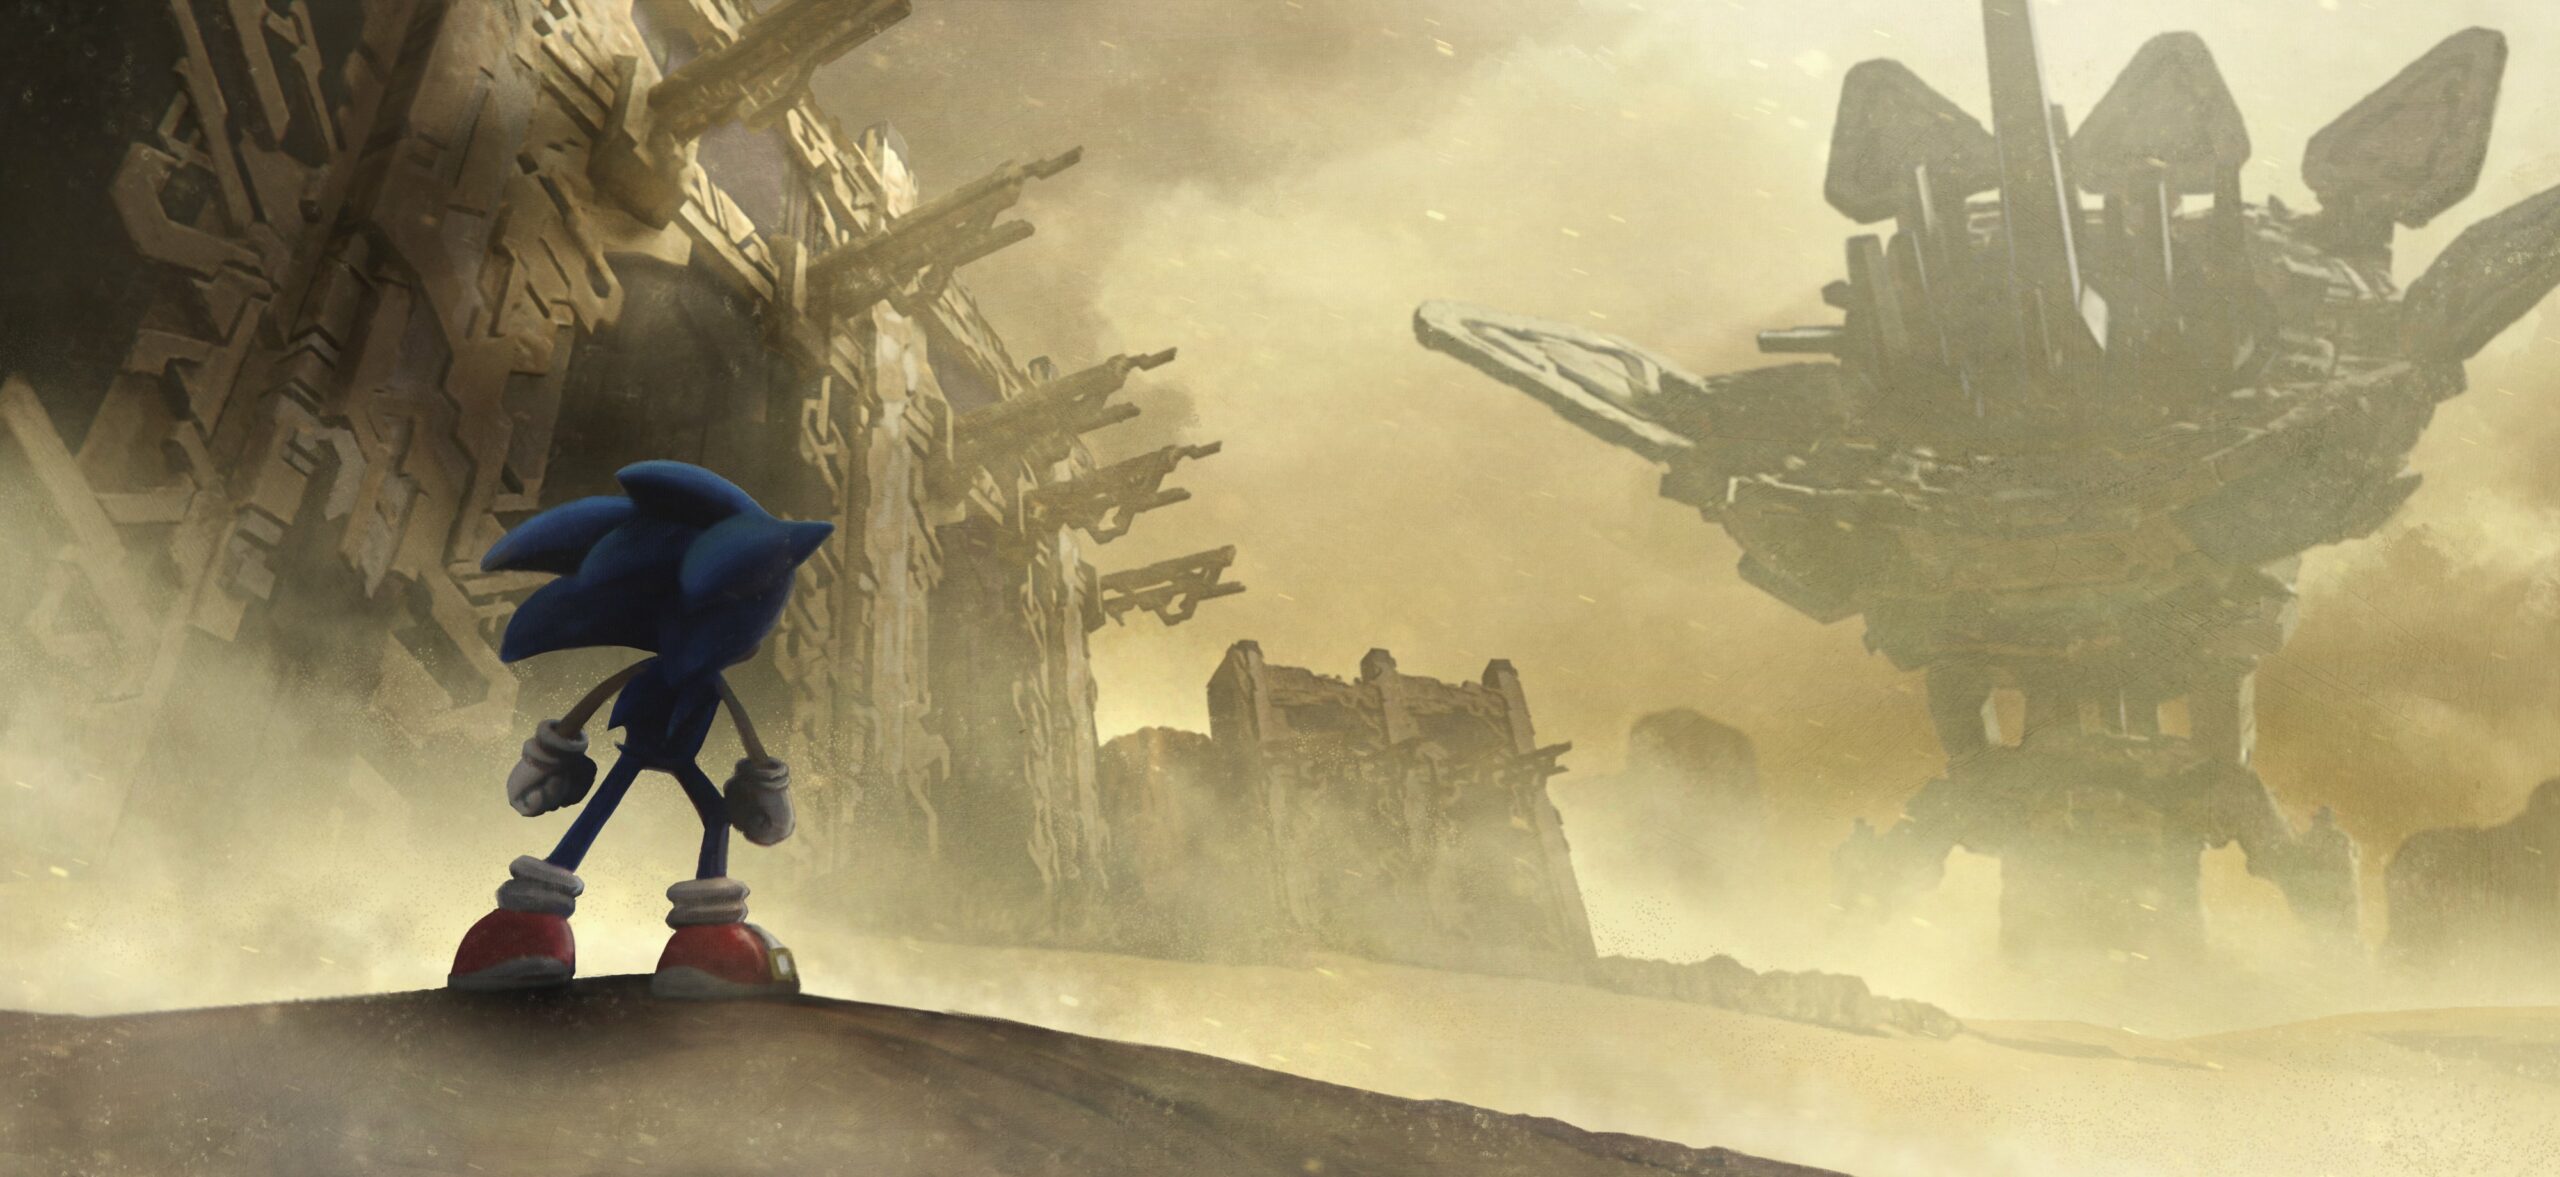 Sonic the Hedgehog looks on to mysterious, sandy ruins, wondering what could be awaiting him.